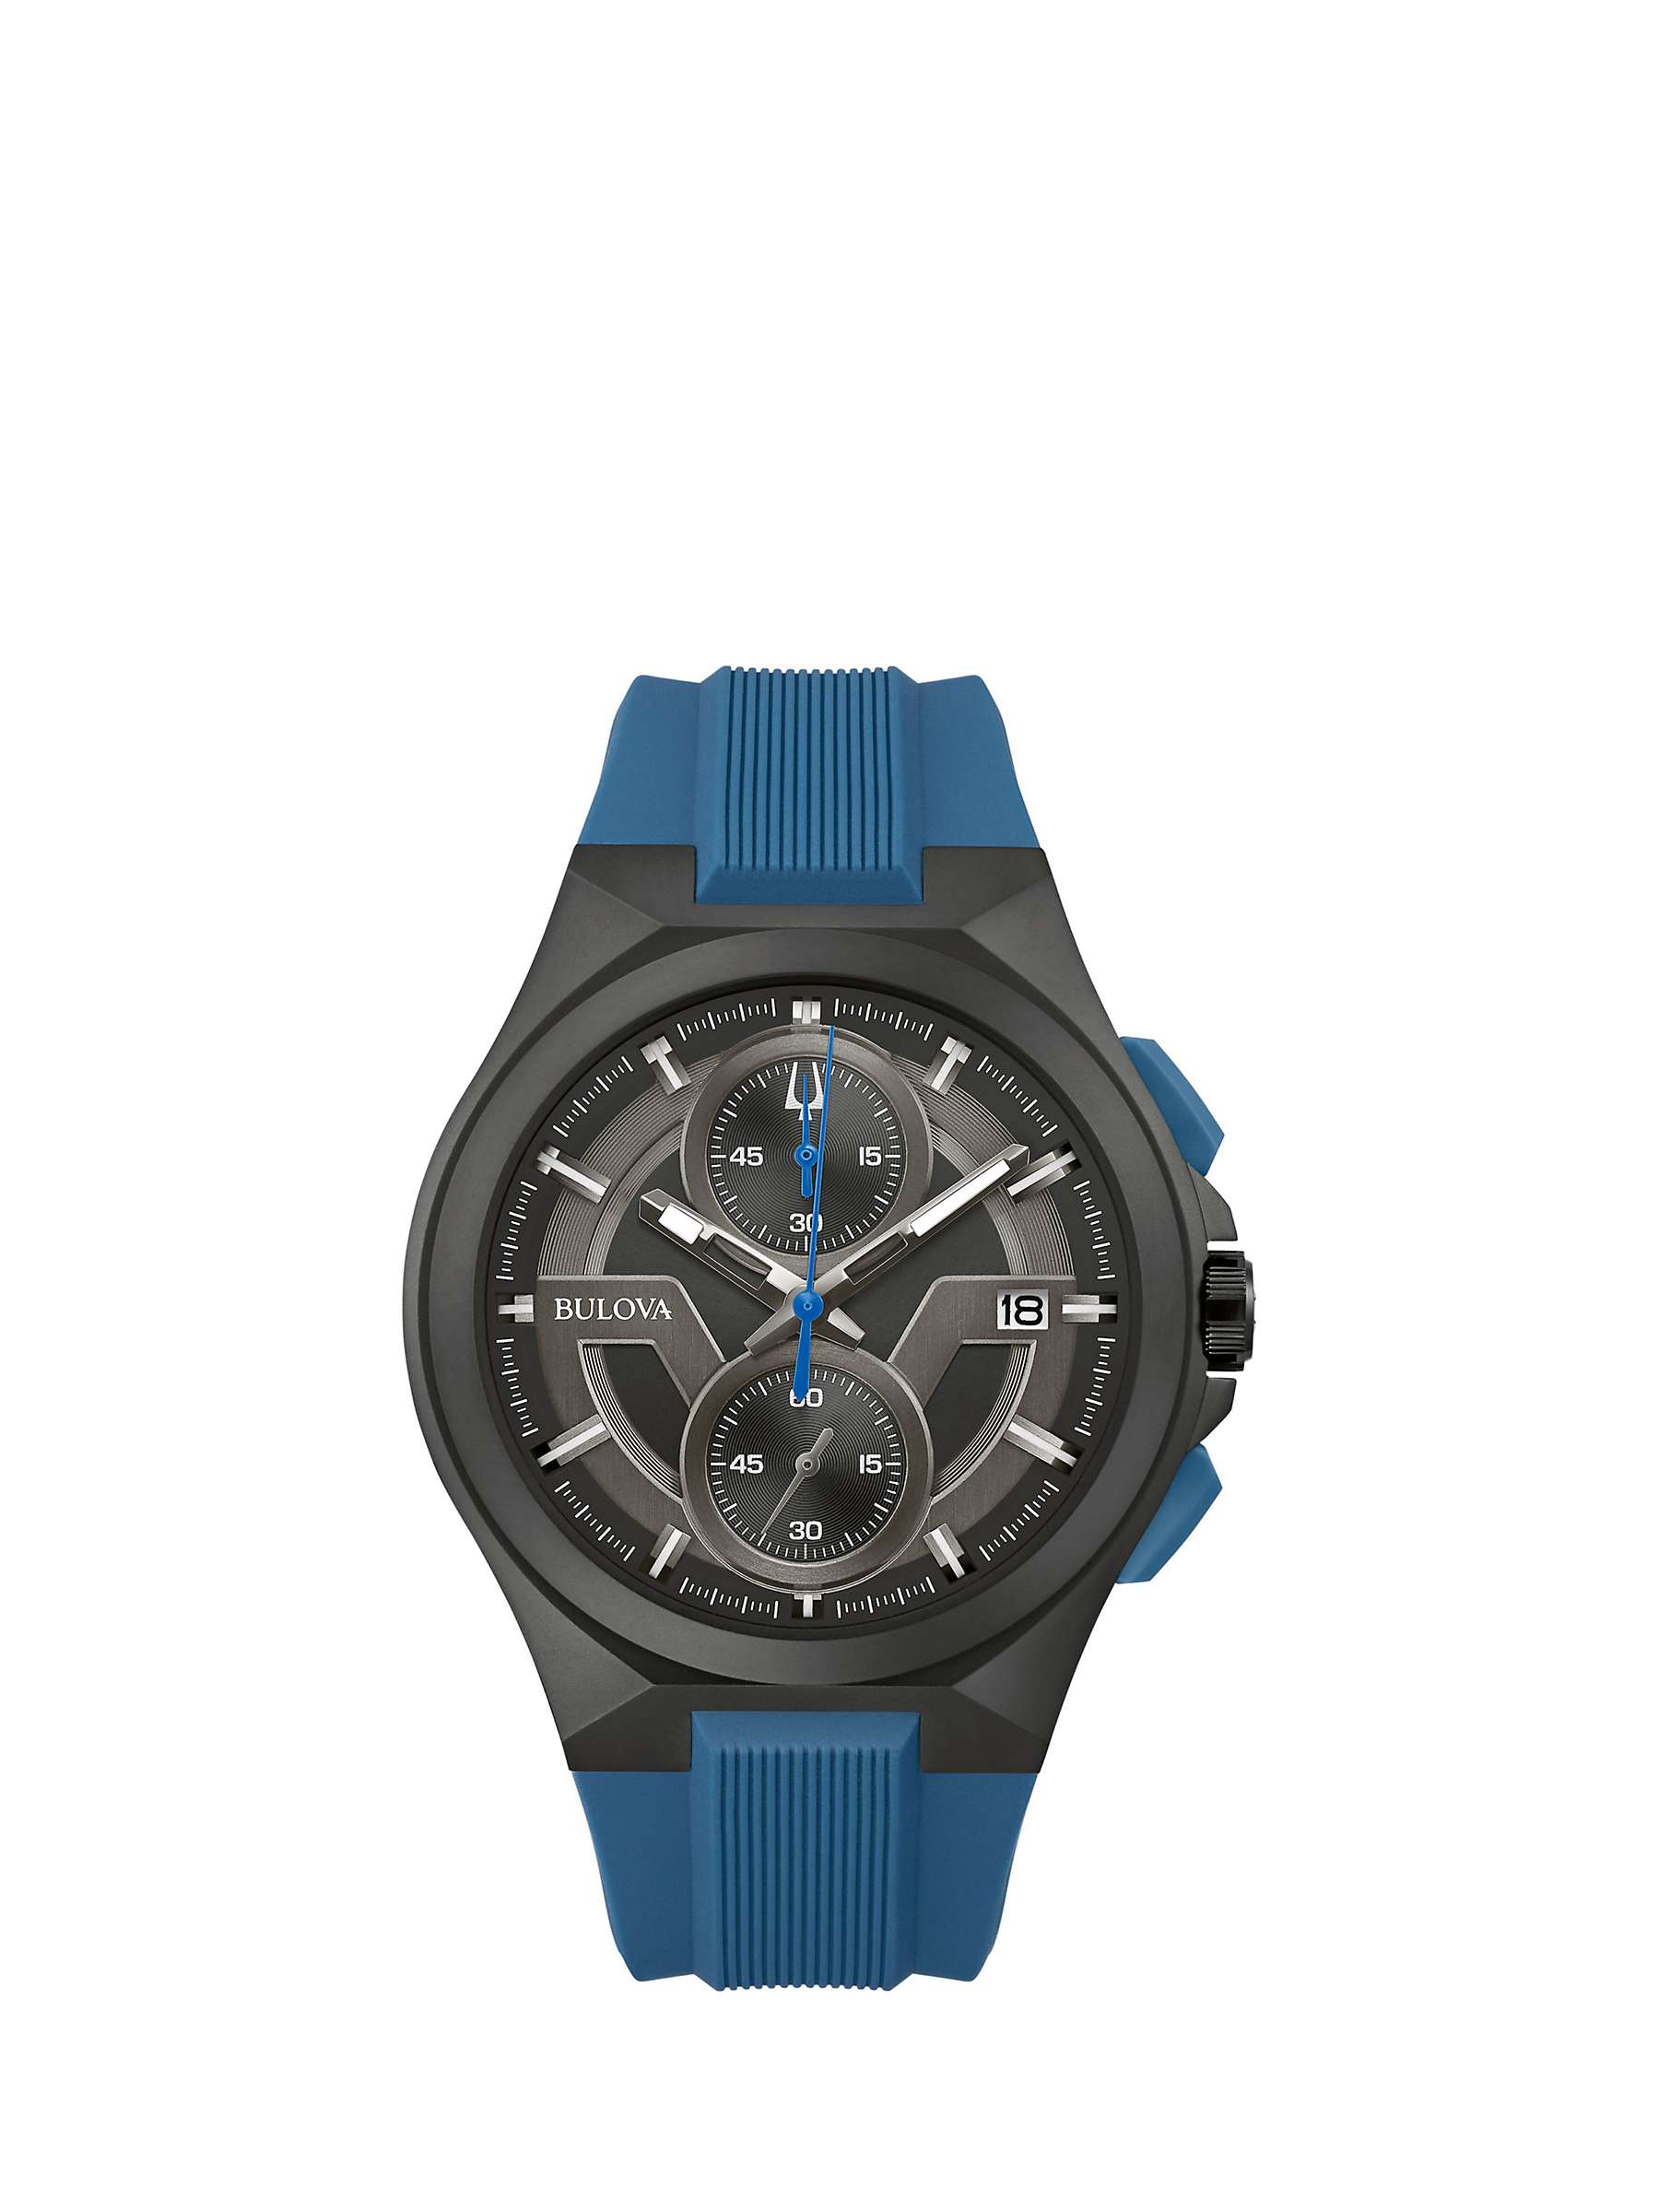 Buy Bulova Men's Maquina Chronograph Date Silicone Strap Watch Online at johnlewis.com